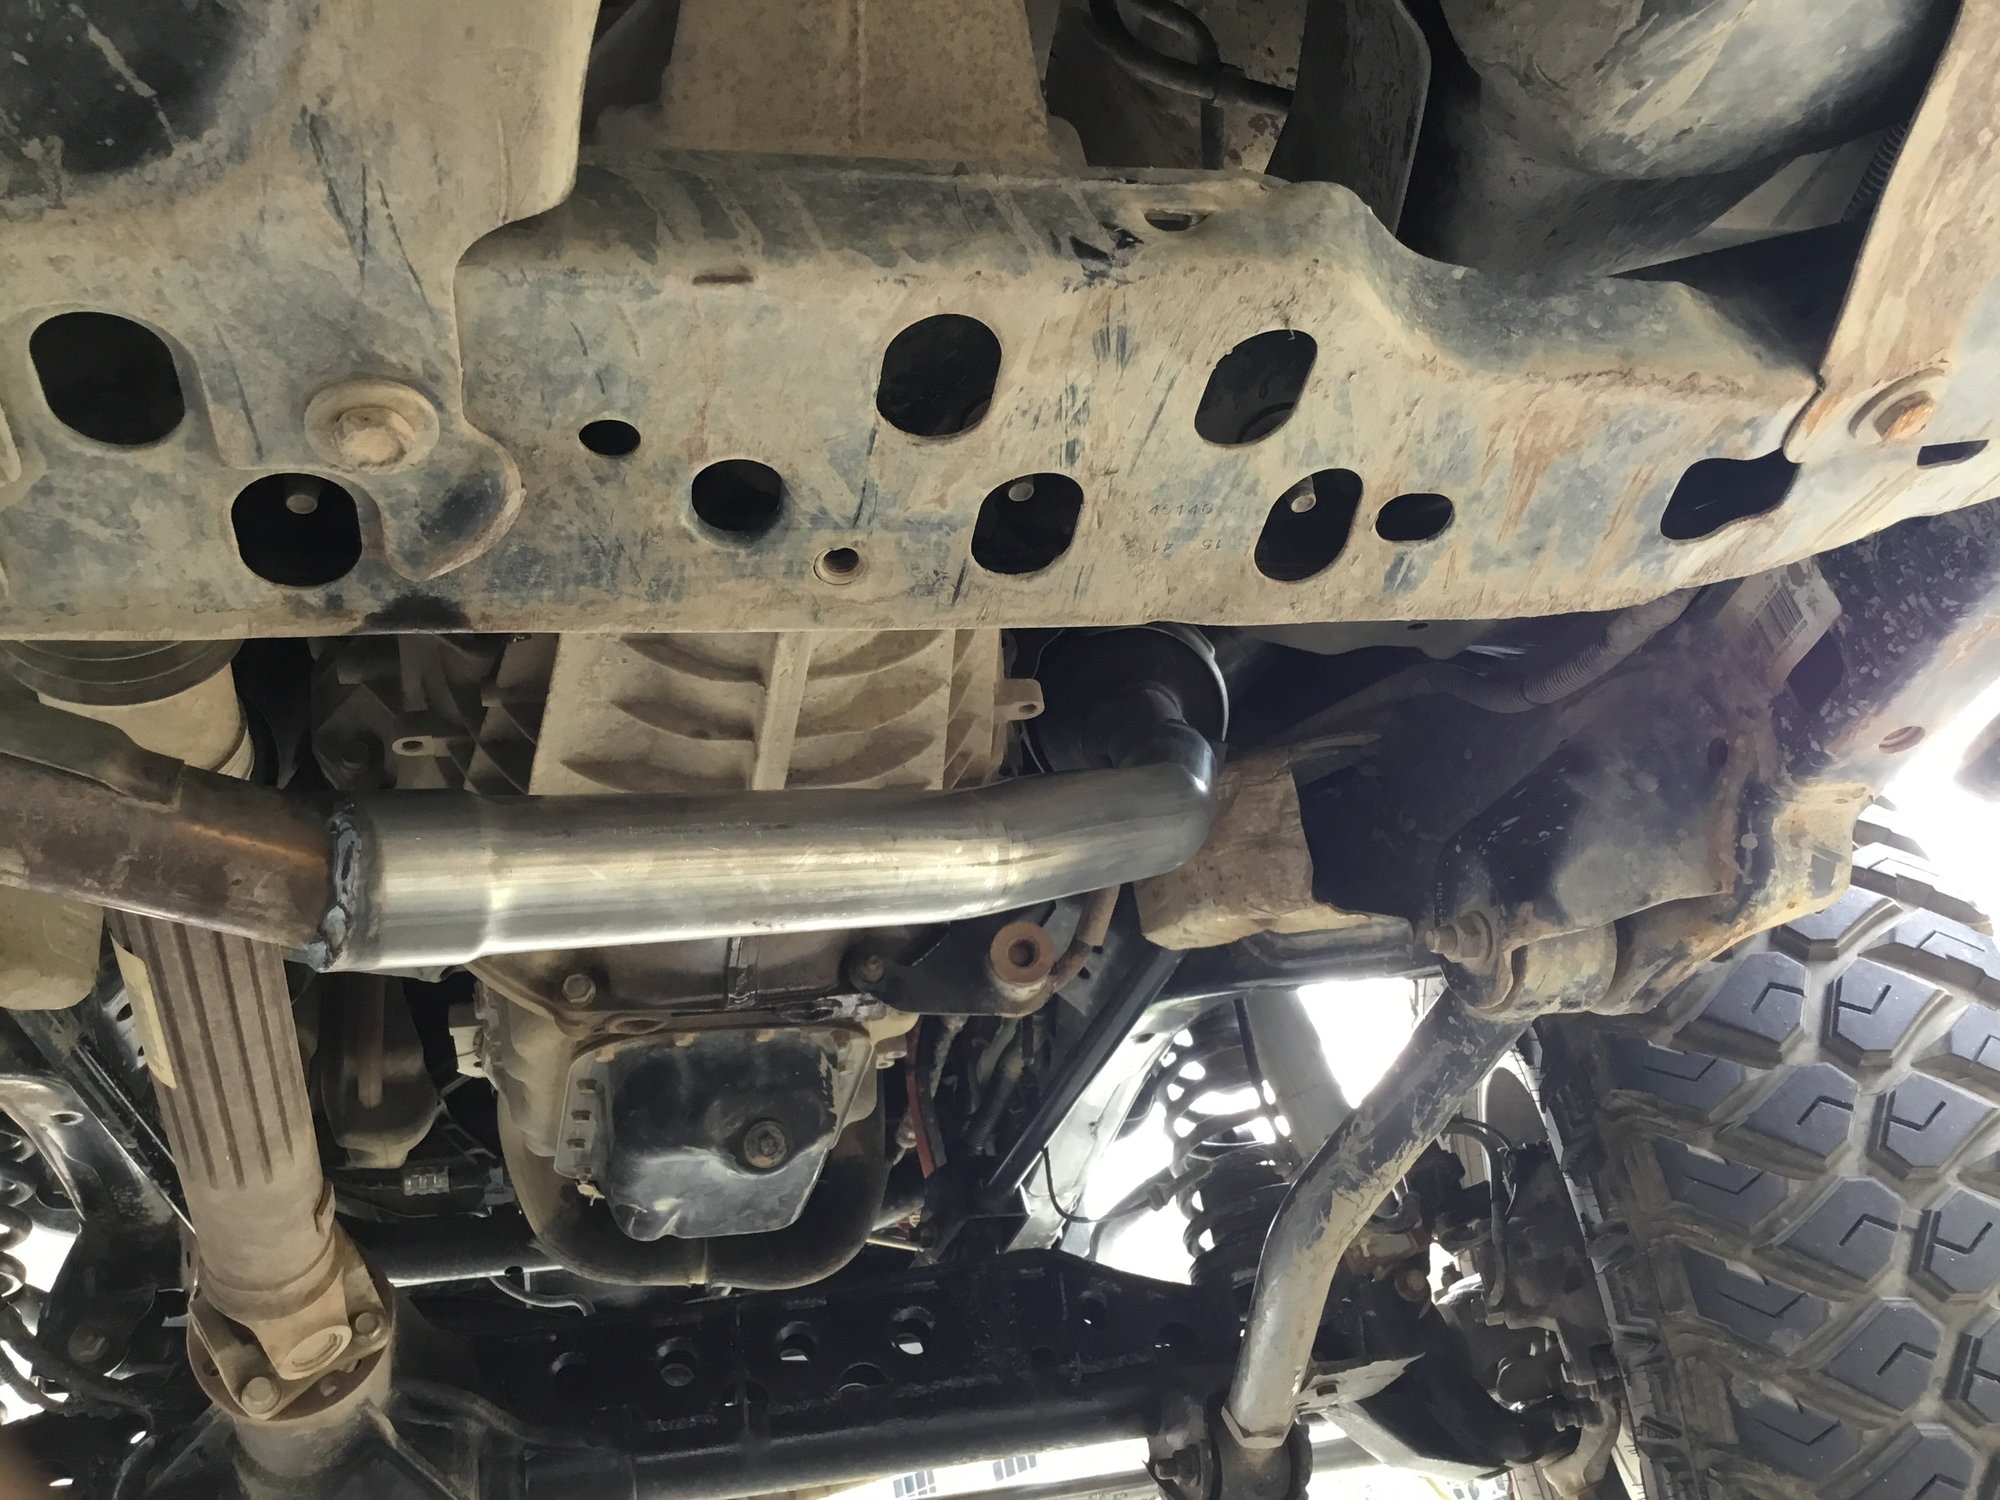  JK exhaust manifold crack?  - The top destination for Jeep  JK and JL Wrangler news, rumors, and discussion